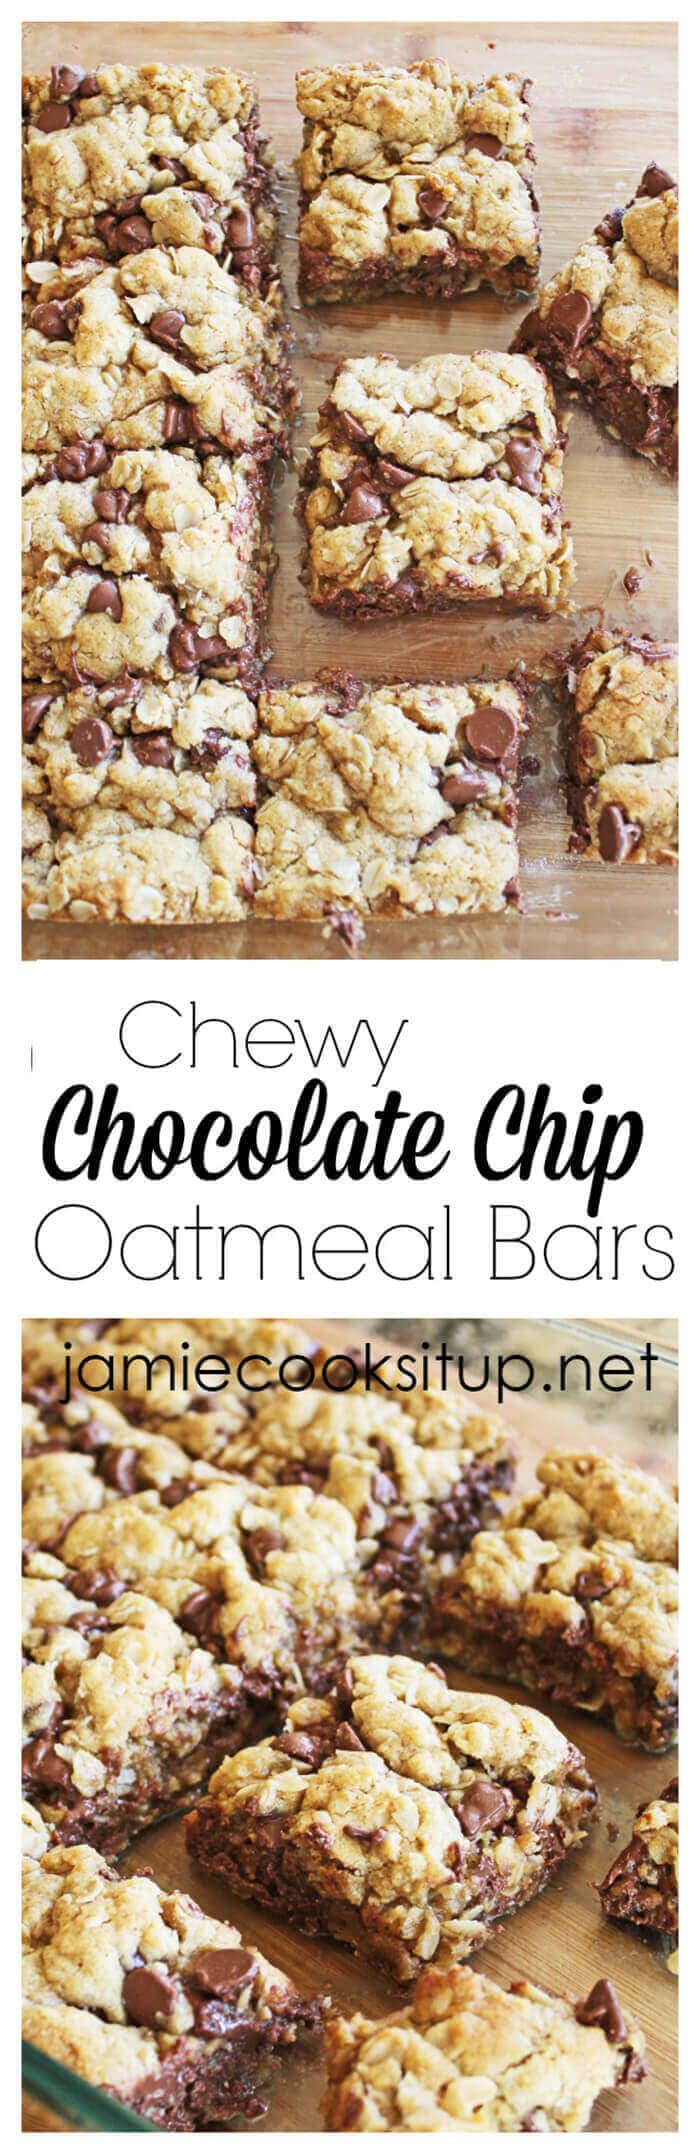 Chewy Chocolate Chip Oatmeal Bars